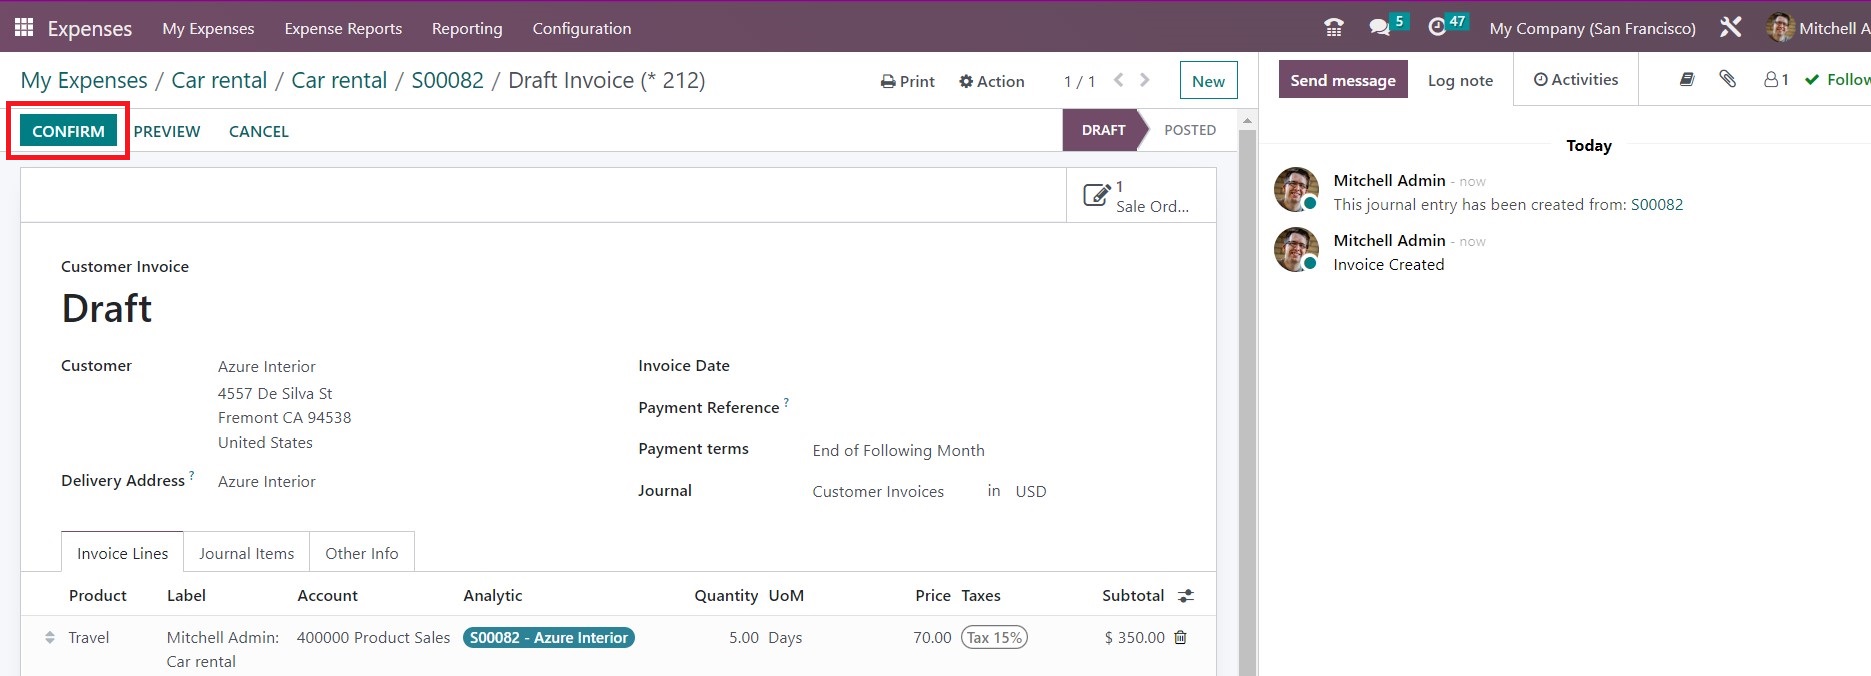 Reinvoicing Expenses To Customers in Odoo - 14 - Midis